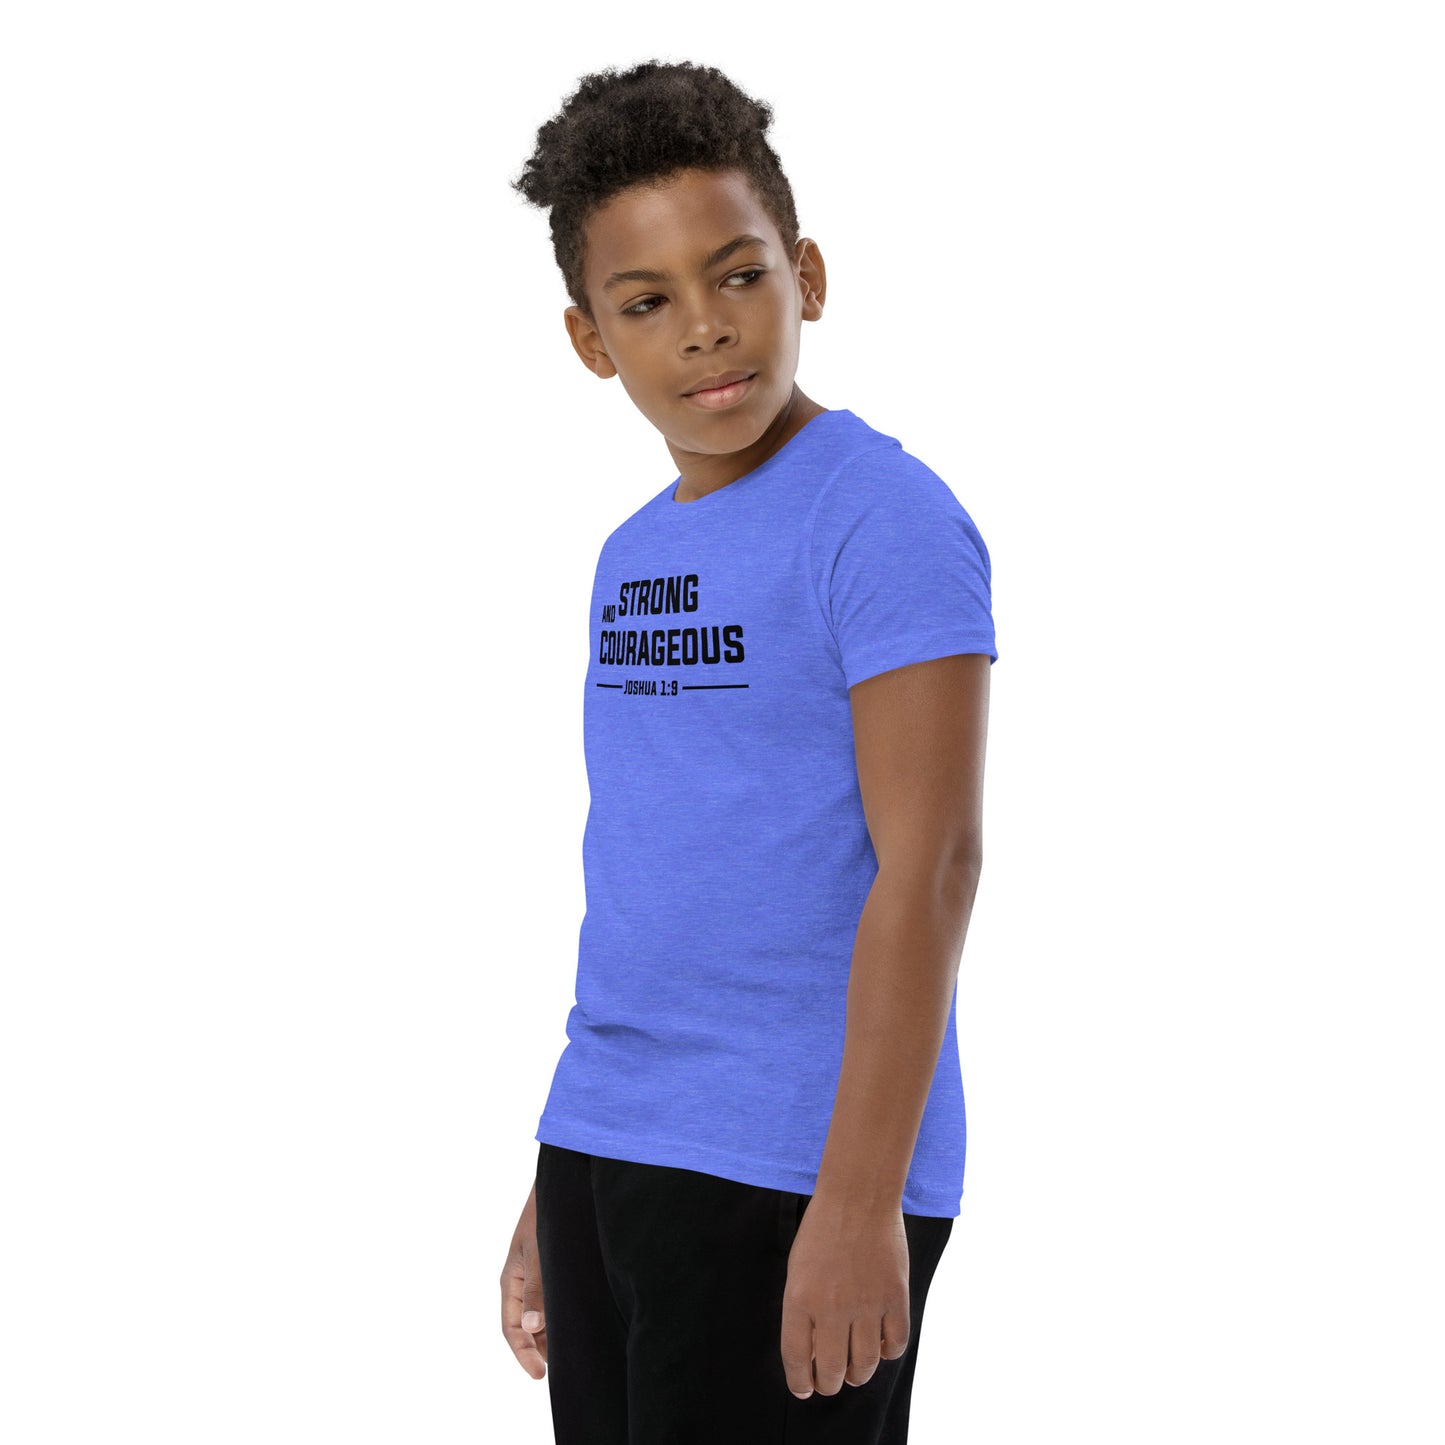 Strong and Courageous Youth T-Shirt